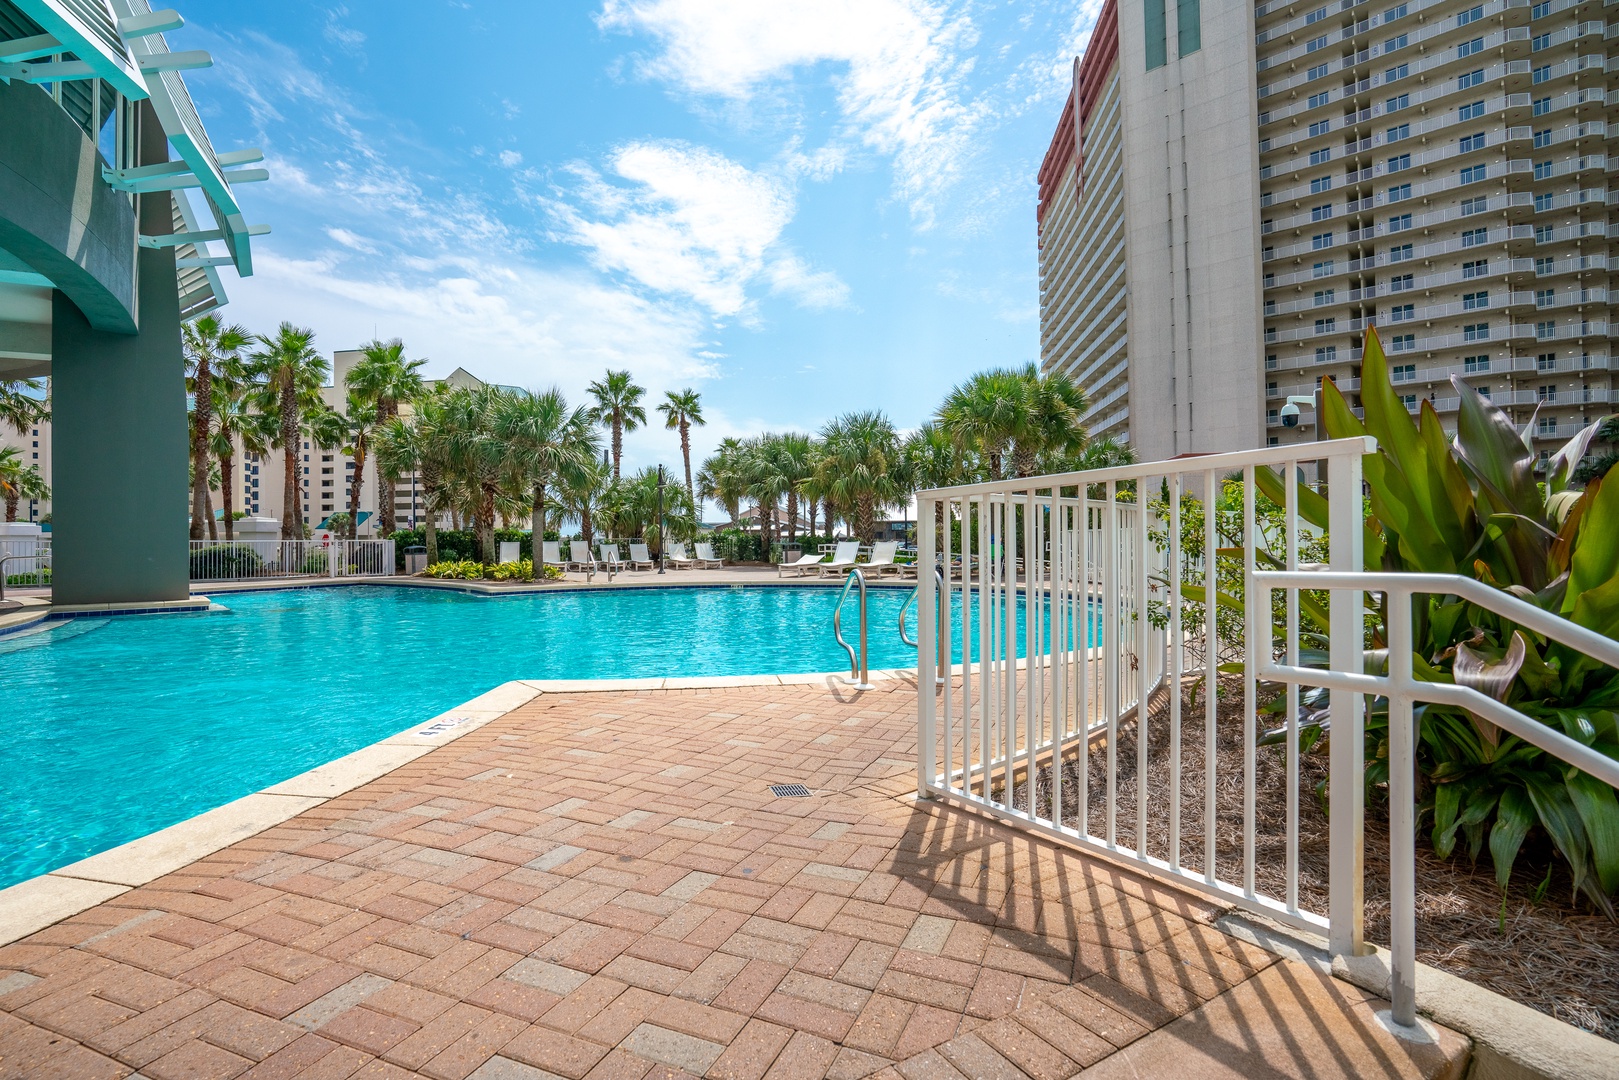 Spend days in the sunshine making a splash in the sparkling communal pool